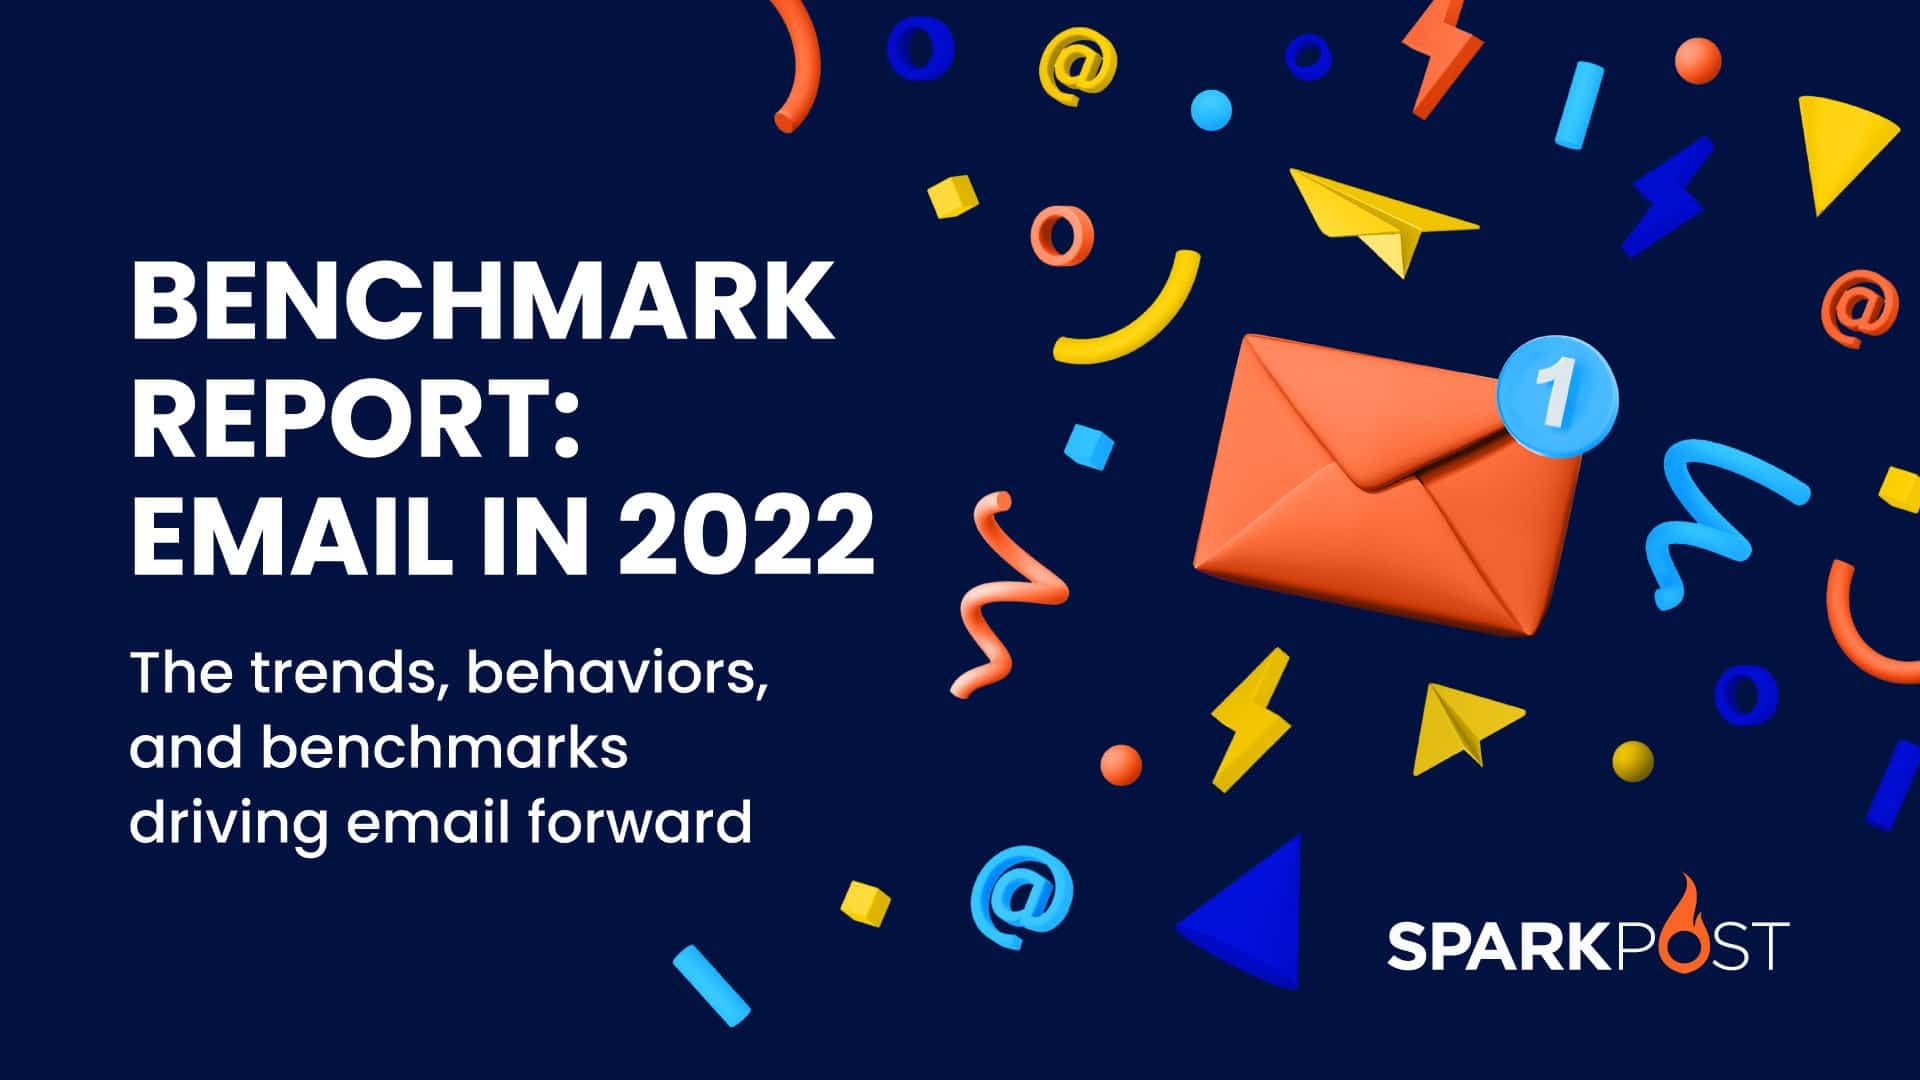 SparkPost Global Survey reveals 74% of marketing leaders concerned with impending privacy changes